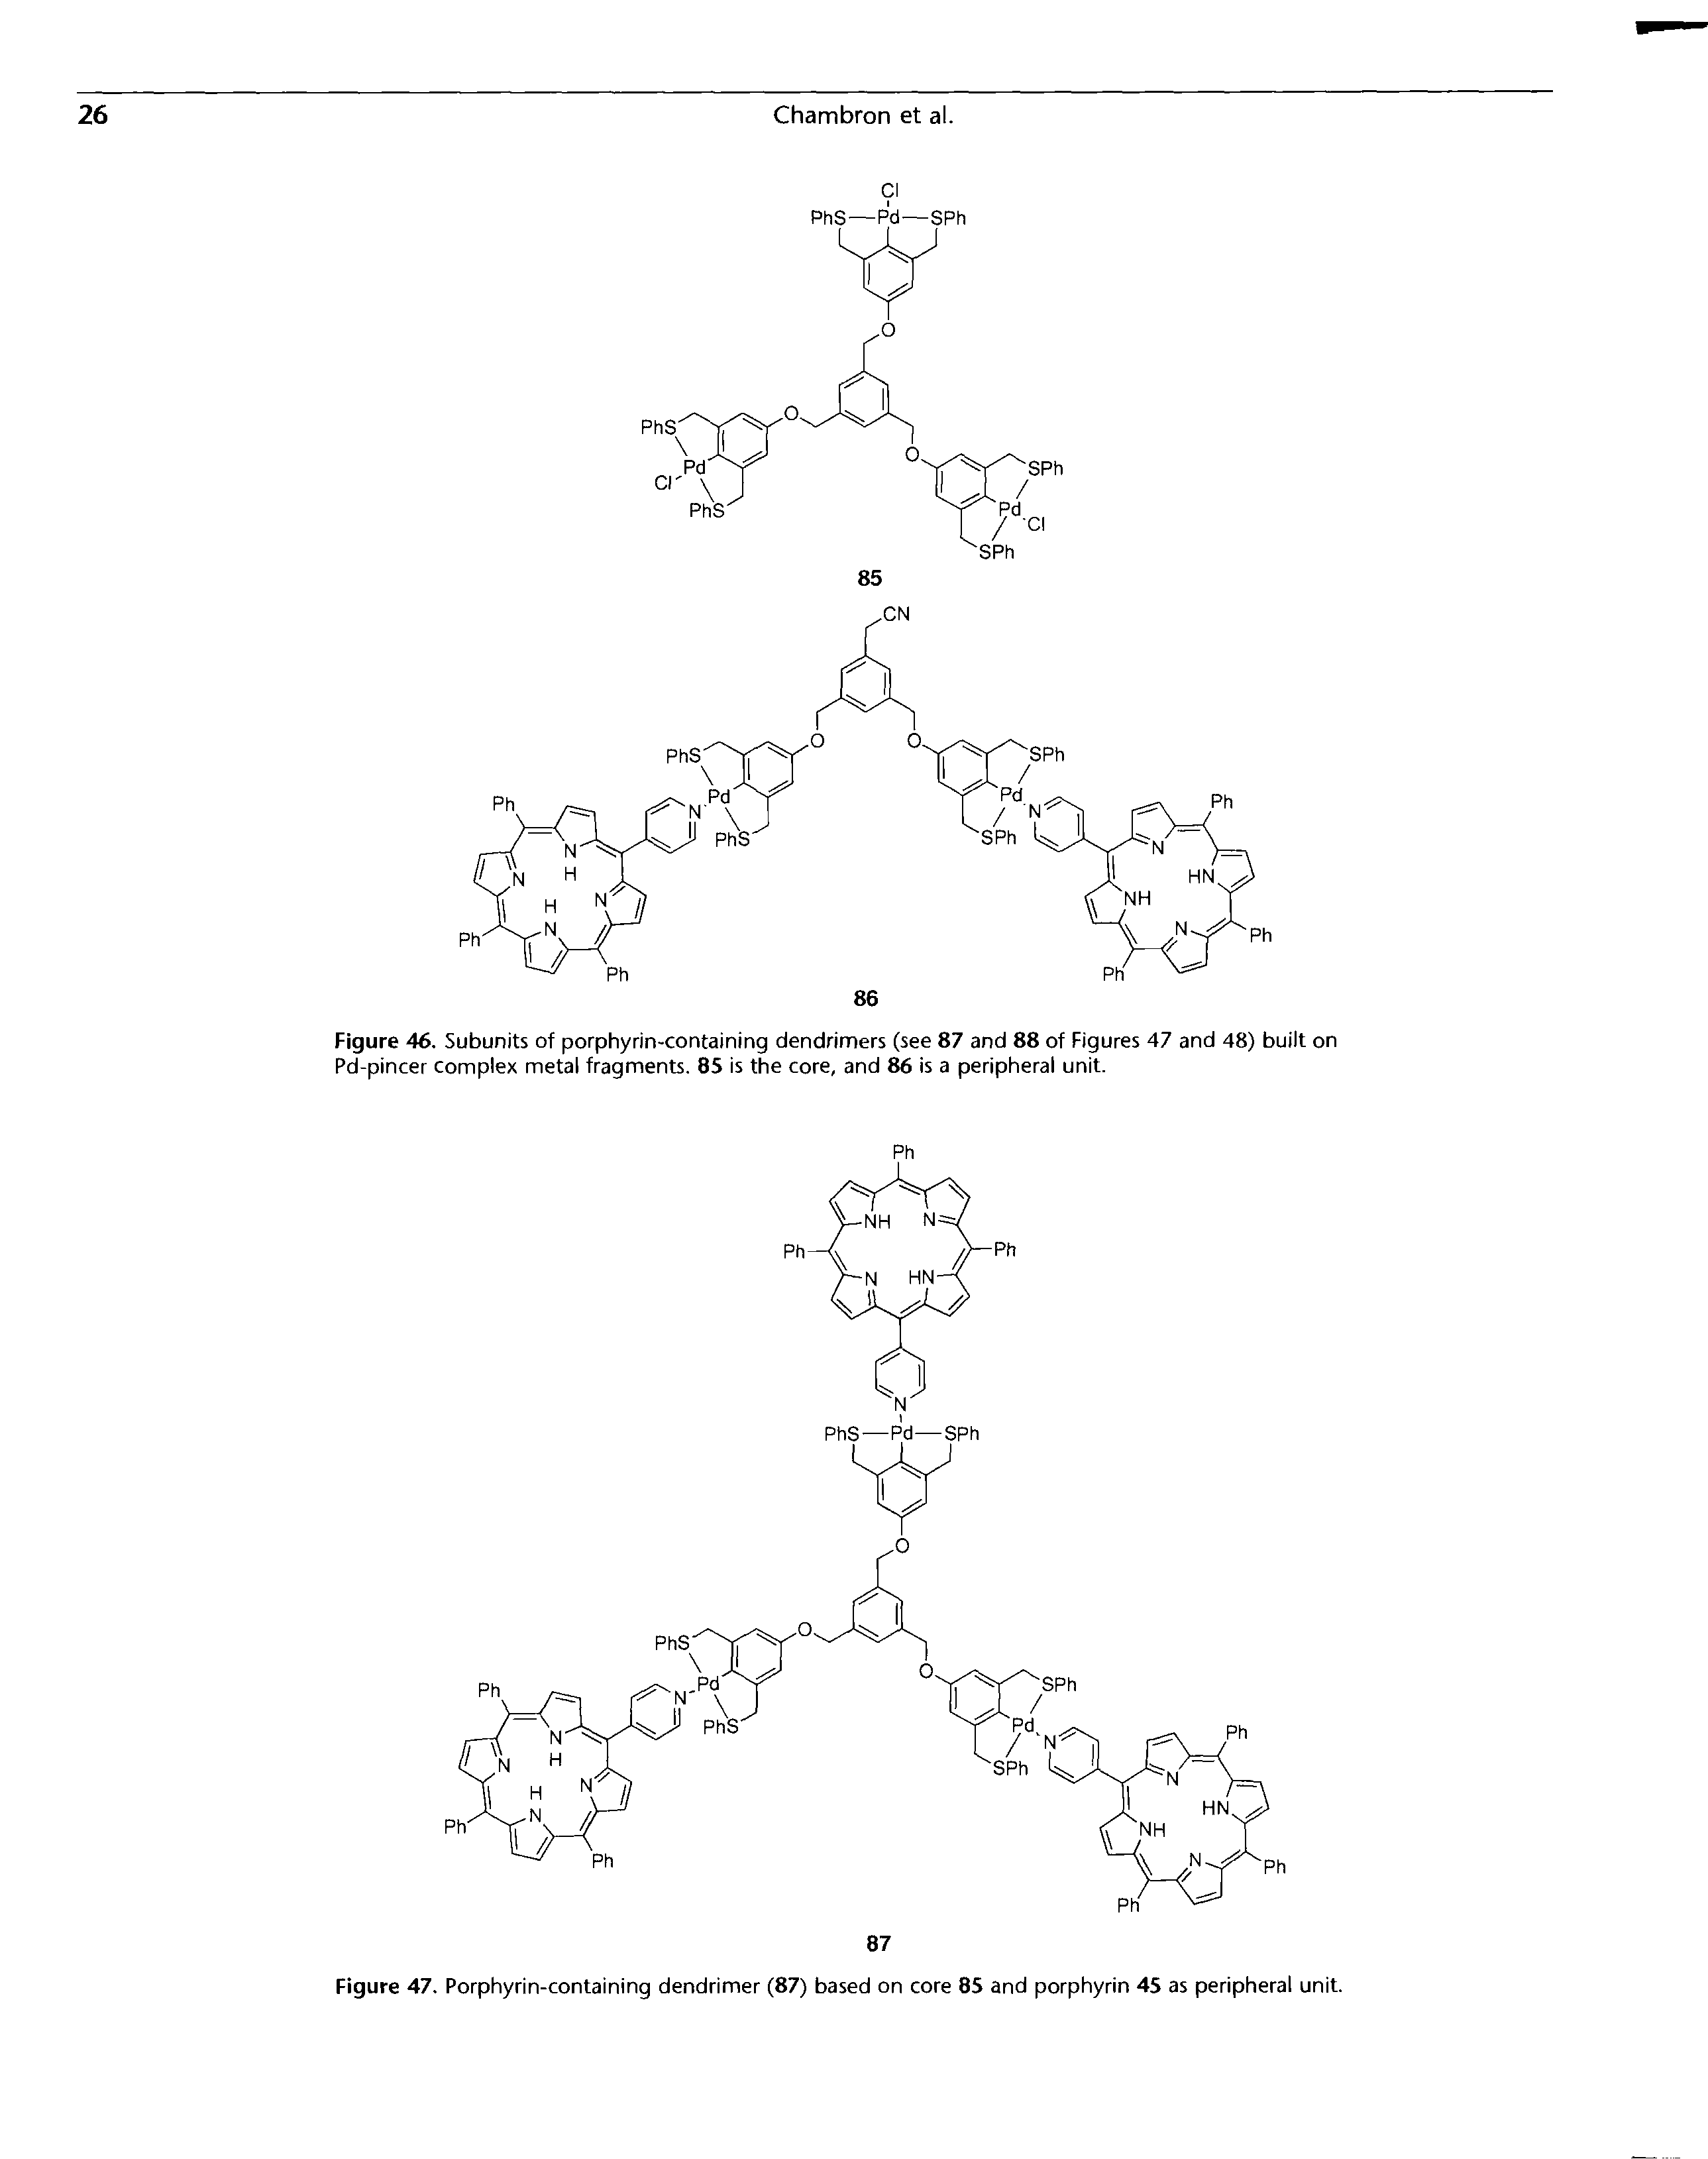 Figure 46. Subunits of porphyrin-containing dendrimers (see 87 and 88 of Figures 47 and 48) built on Pd-pincer complex metal fragments. 85 is the core, and 86 is a peripheral unit.